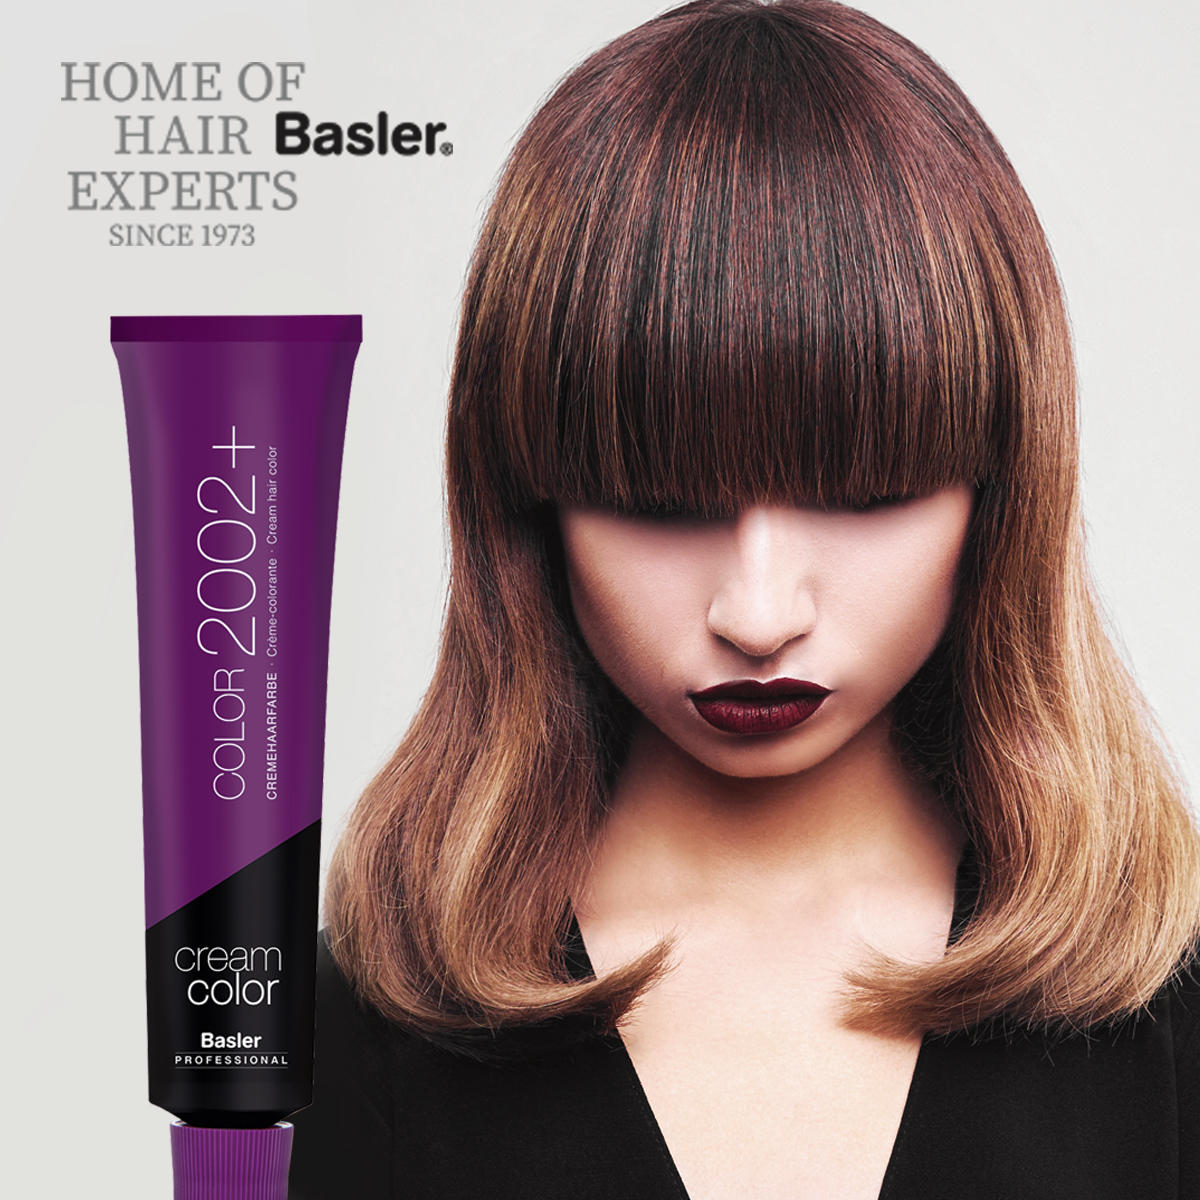 Basler cream hair colour 5/43 light brown red gold - red orchid, tube 60 ml - 3